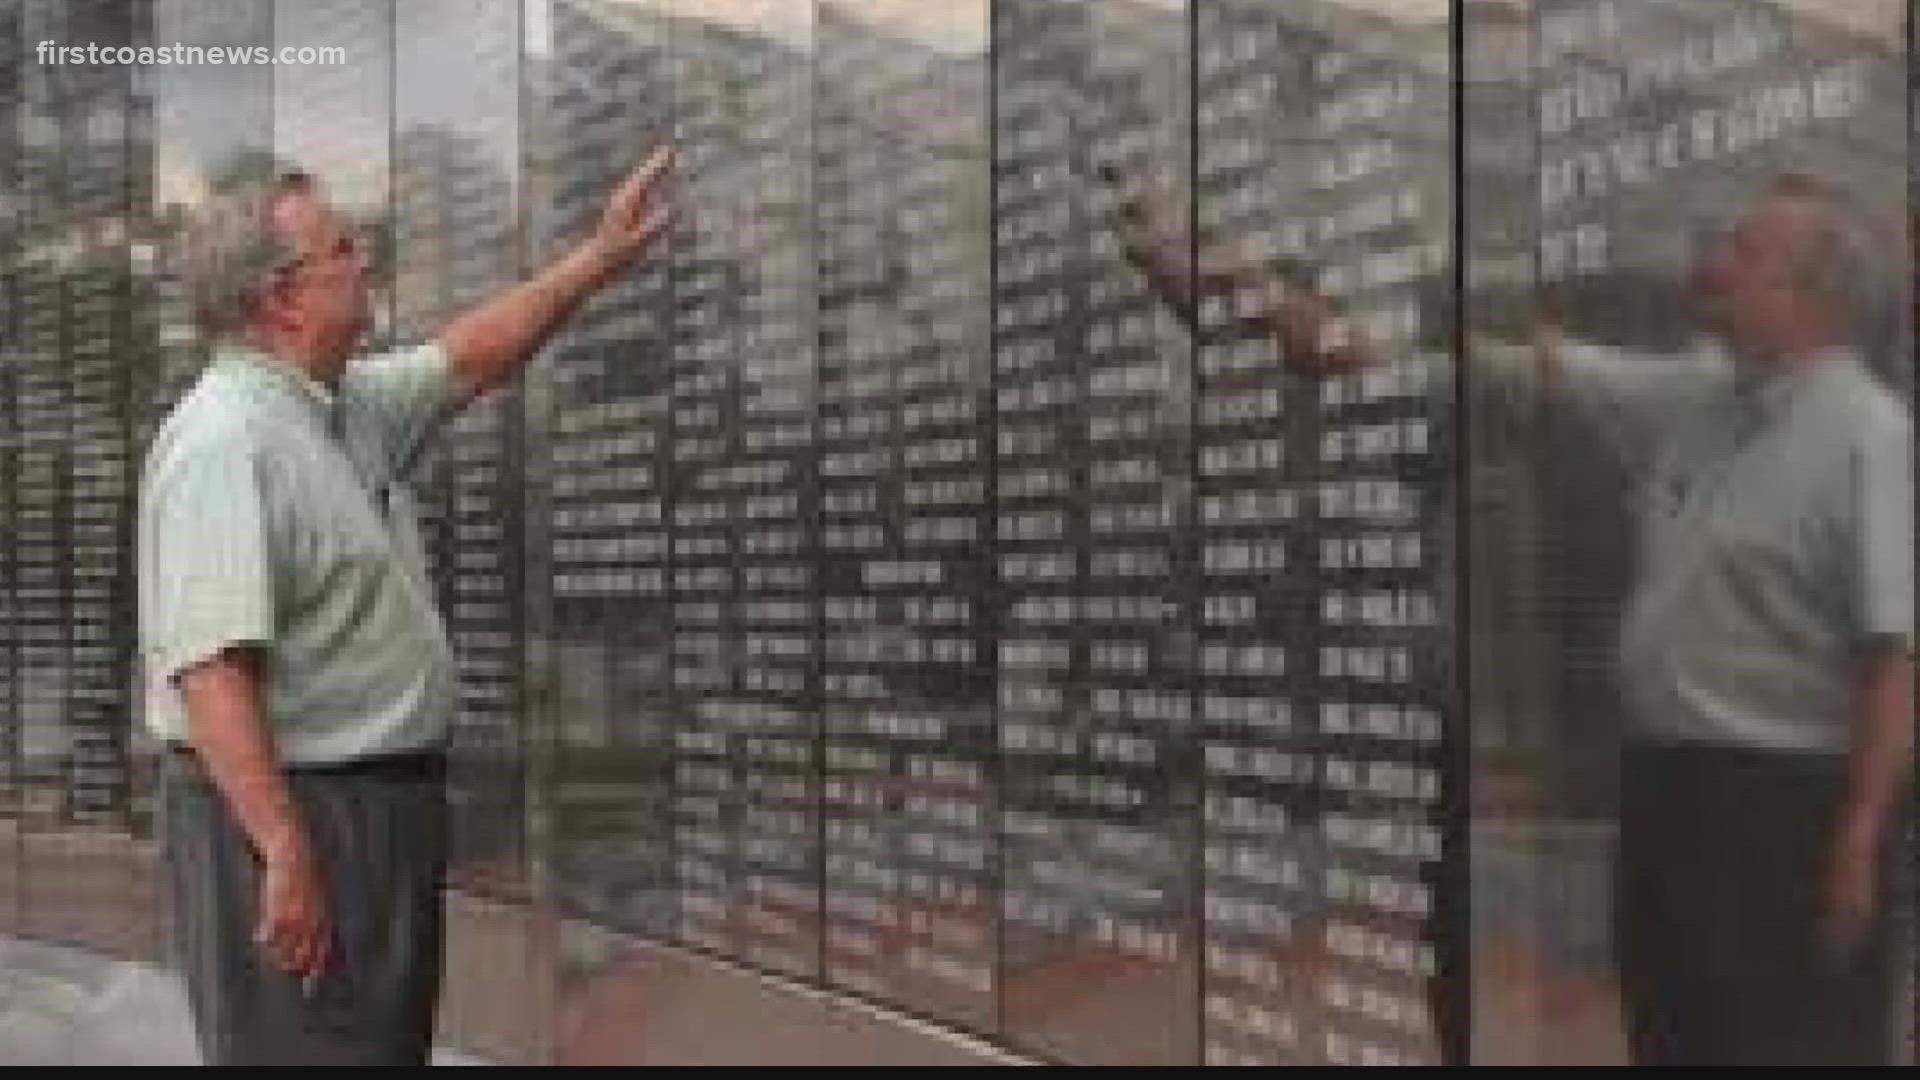 In 1995 Jacksonville's Veterans Memorial Wall was dedicated as a tribute to those who served and were killed in action.